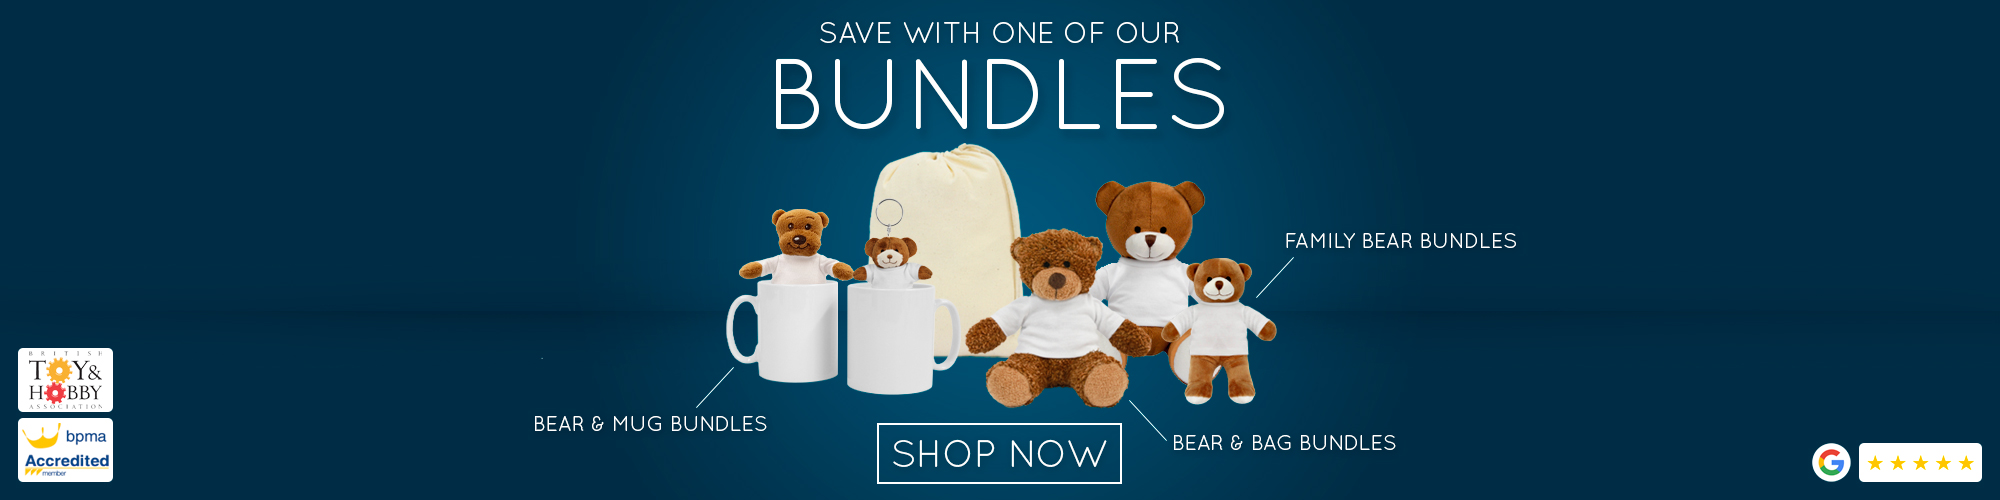 Promotional Products | Branded Soft Toys - Cuddly Teddy Bears For All Ages - Perfect For Promoting Your Brand